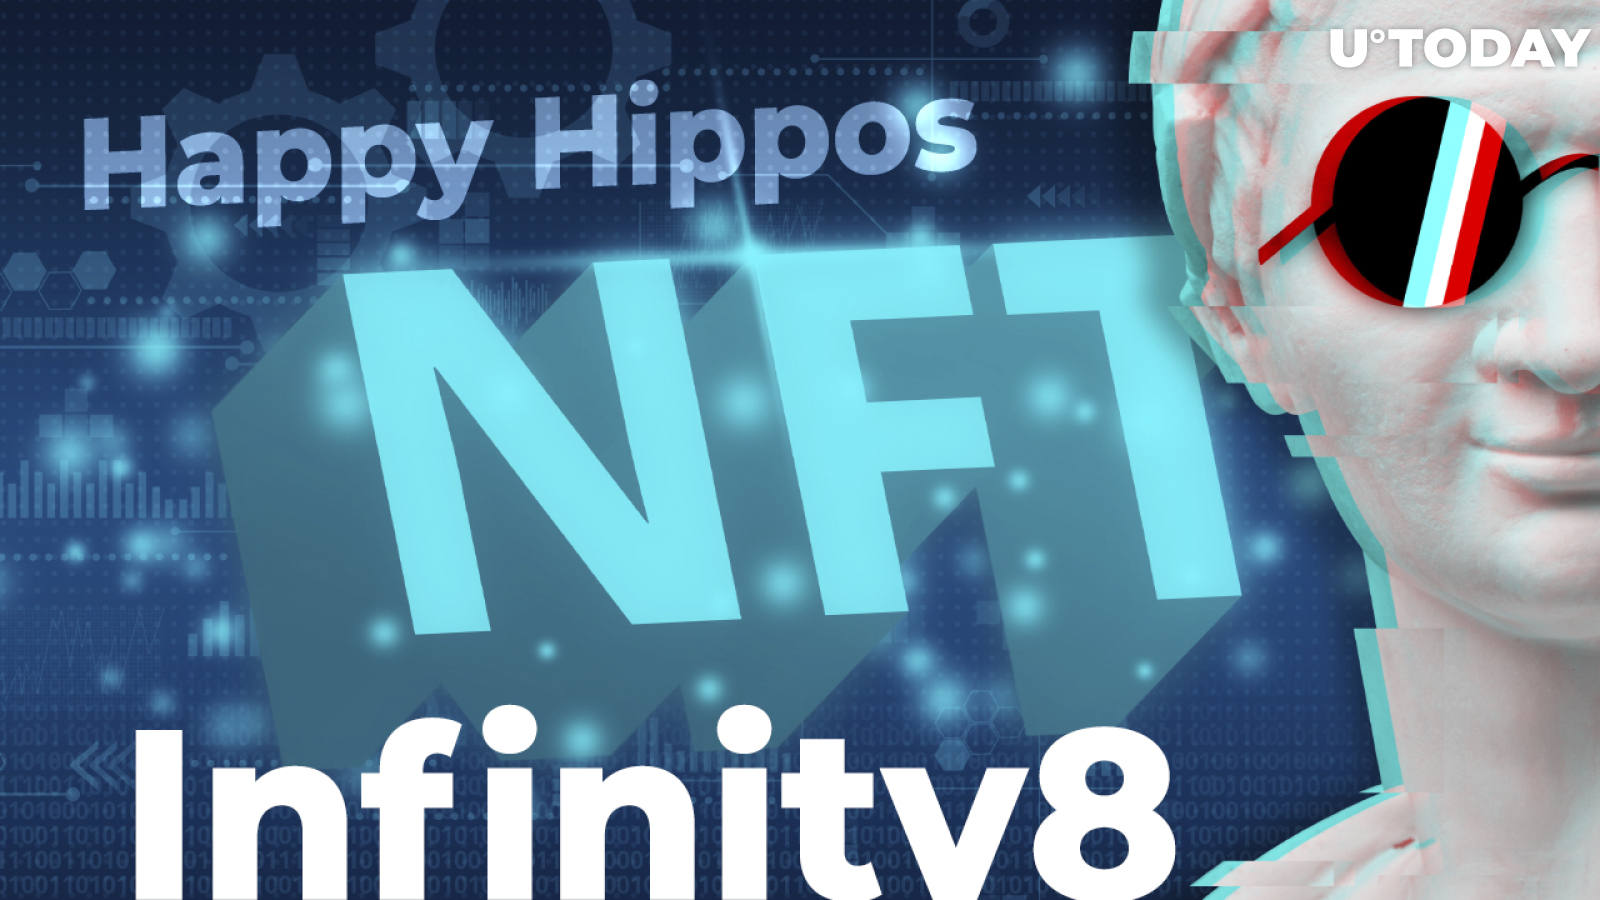 Happy Hippos NFT Sale Launched by Infinity8: Details